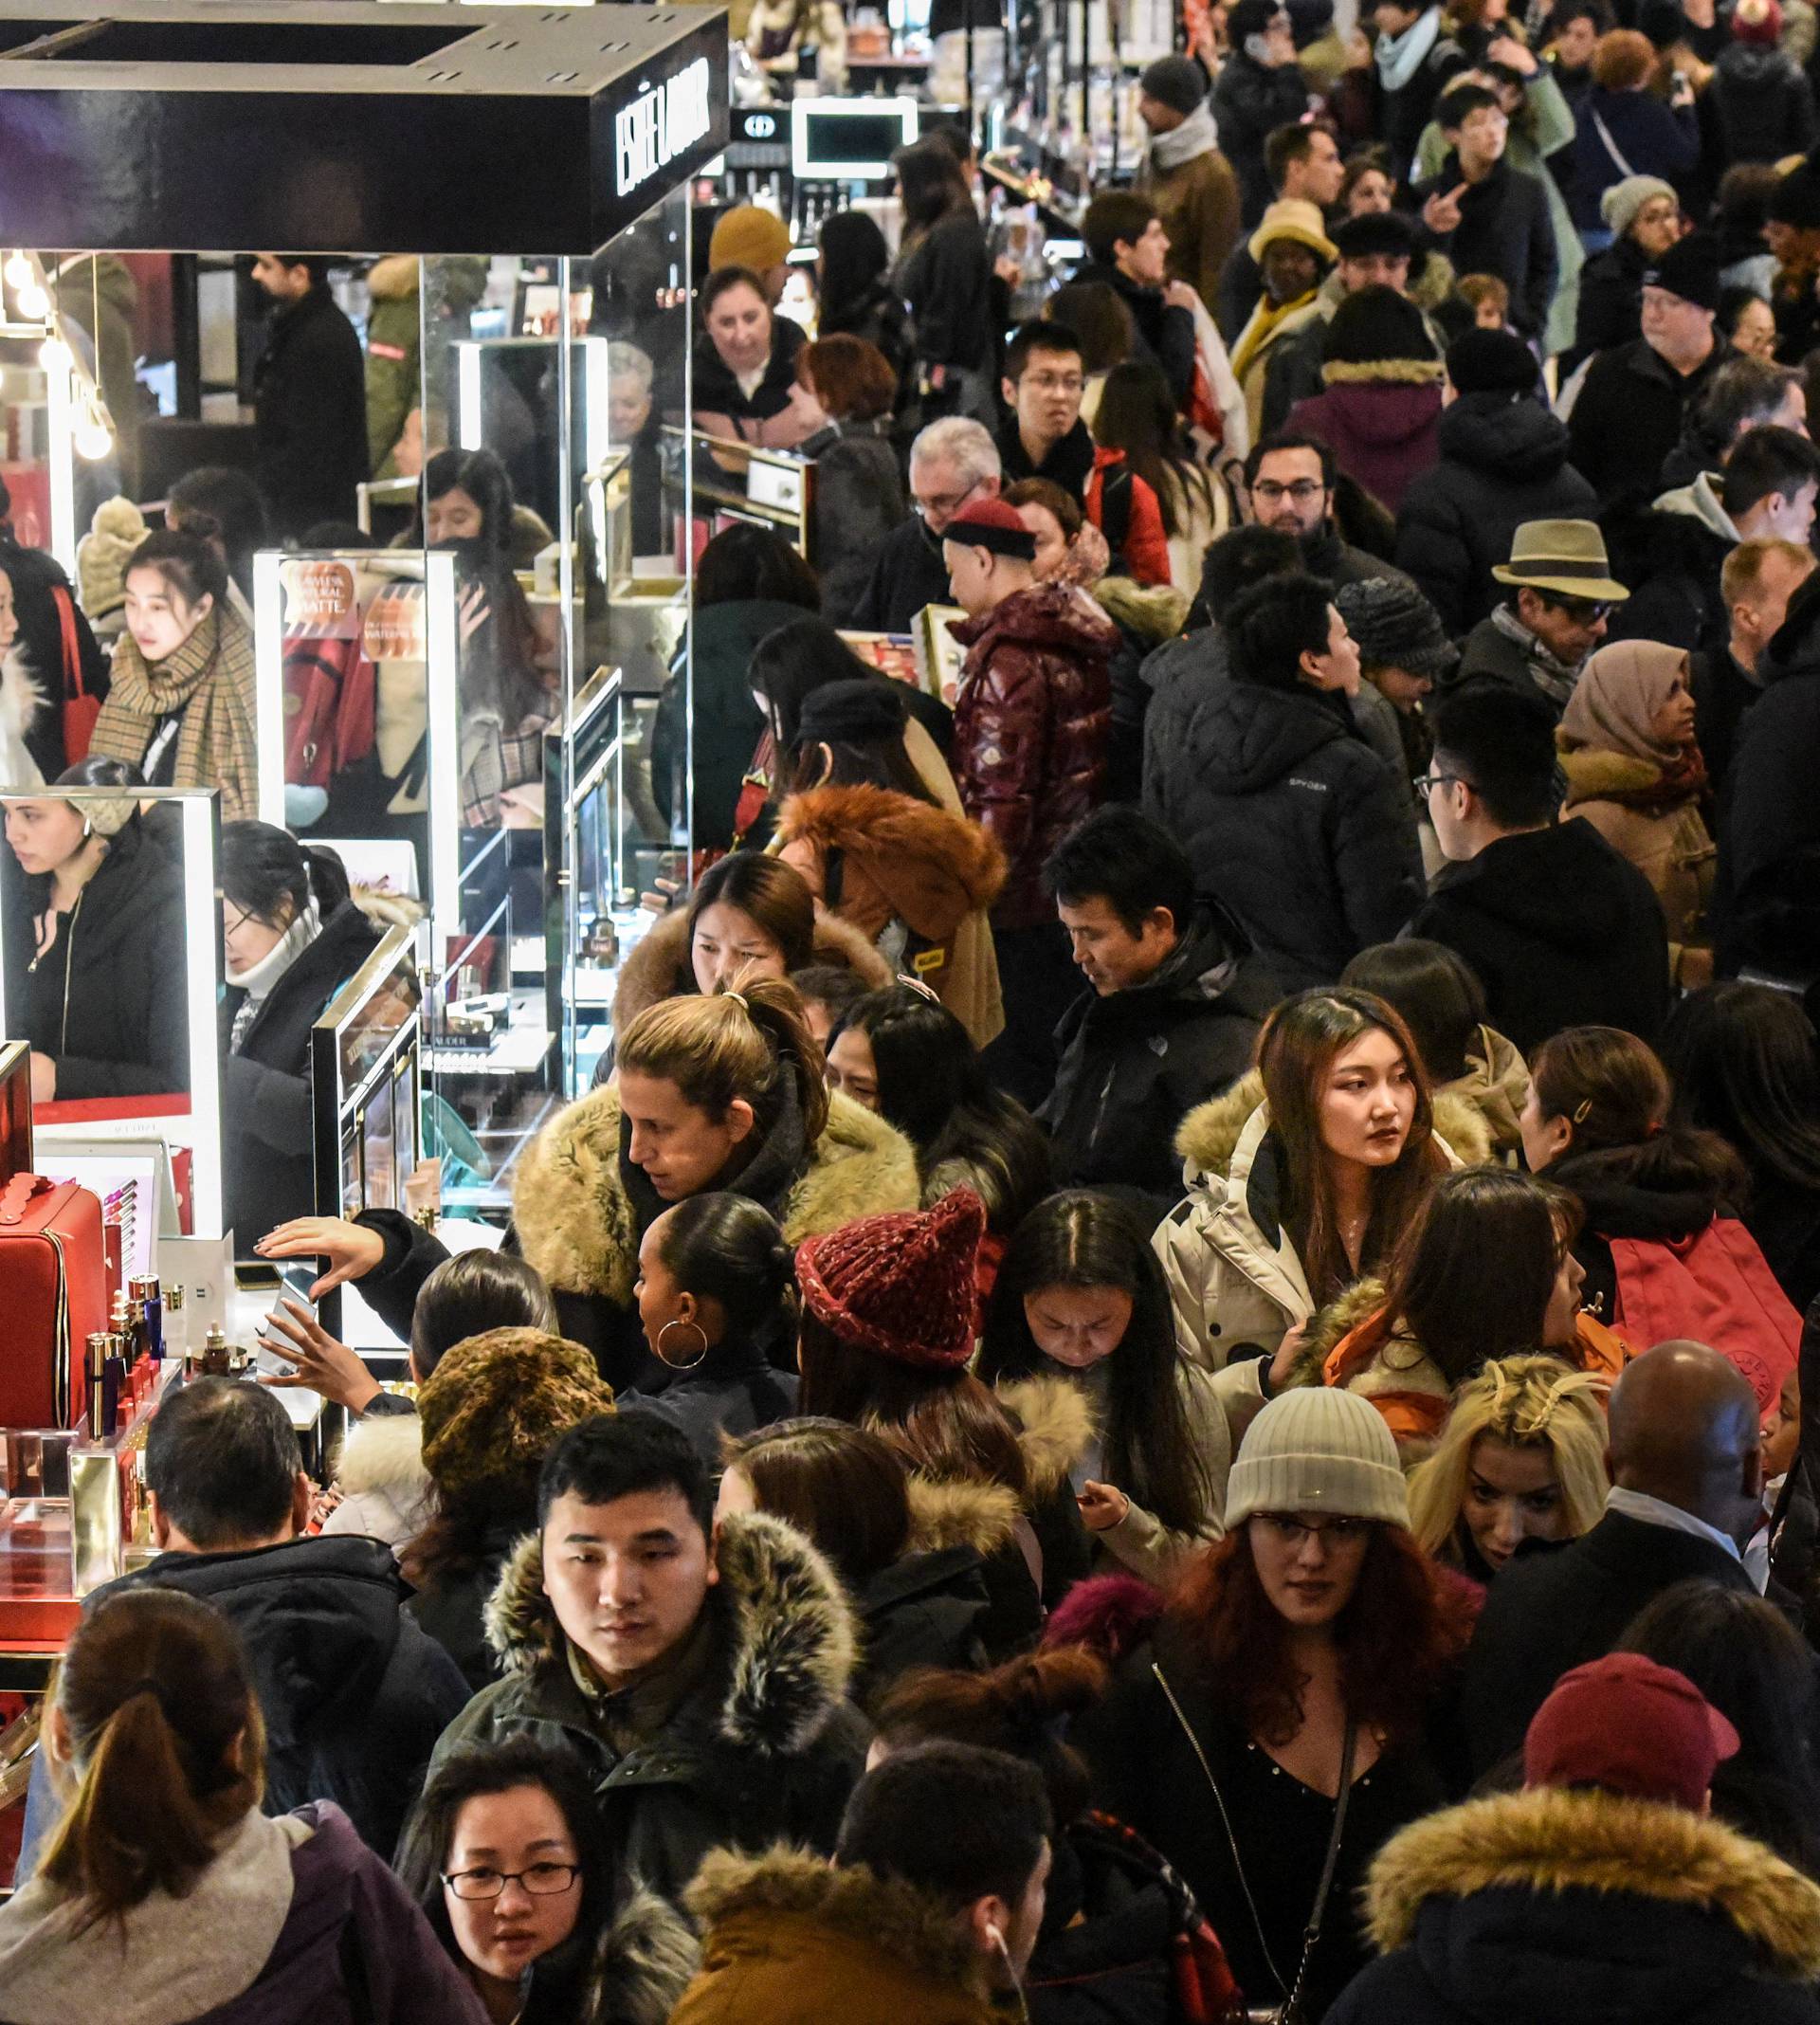 A large crowd of people shop during a Black Friday sales event at Macy's flagship store in New York City